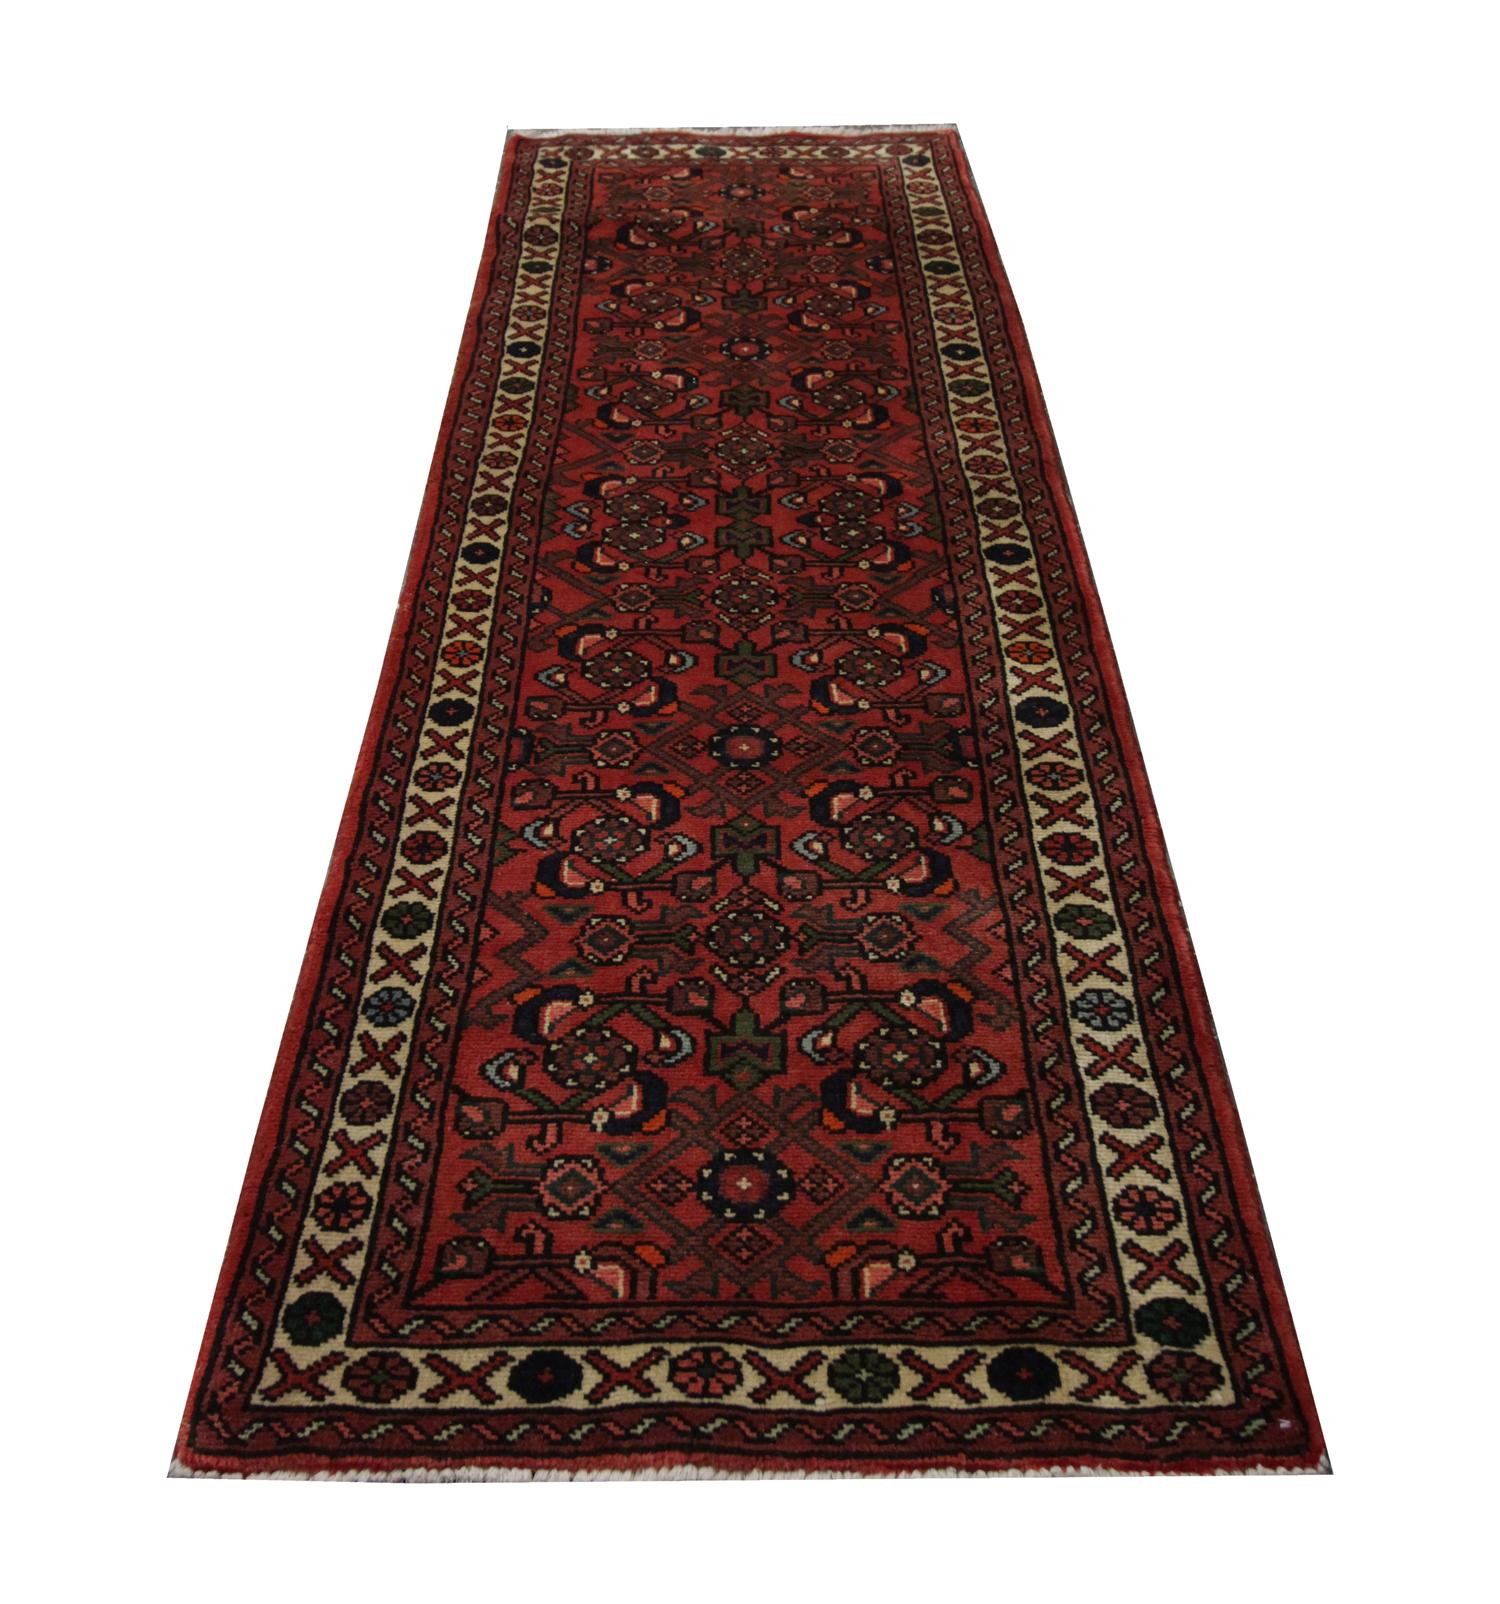 This fine wool runner rug features a bold design with deep red background with a floral design covering the centre. A layered border has then framed this. 
The colour and design in this elegant piece make it the perfect accent accessory for any home